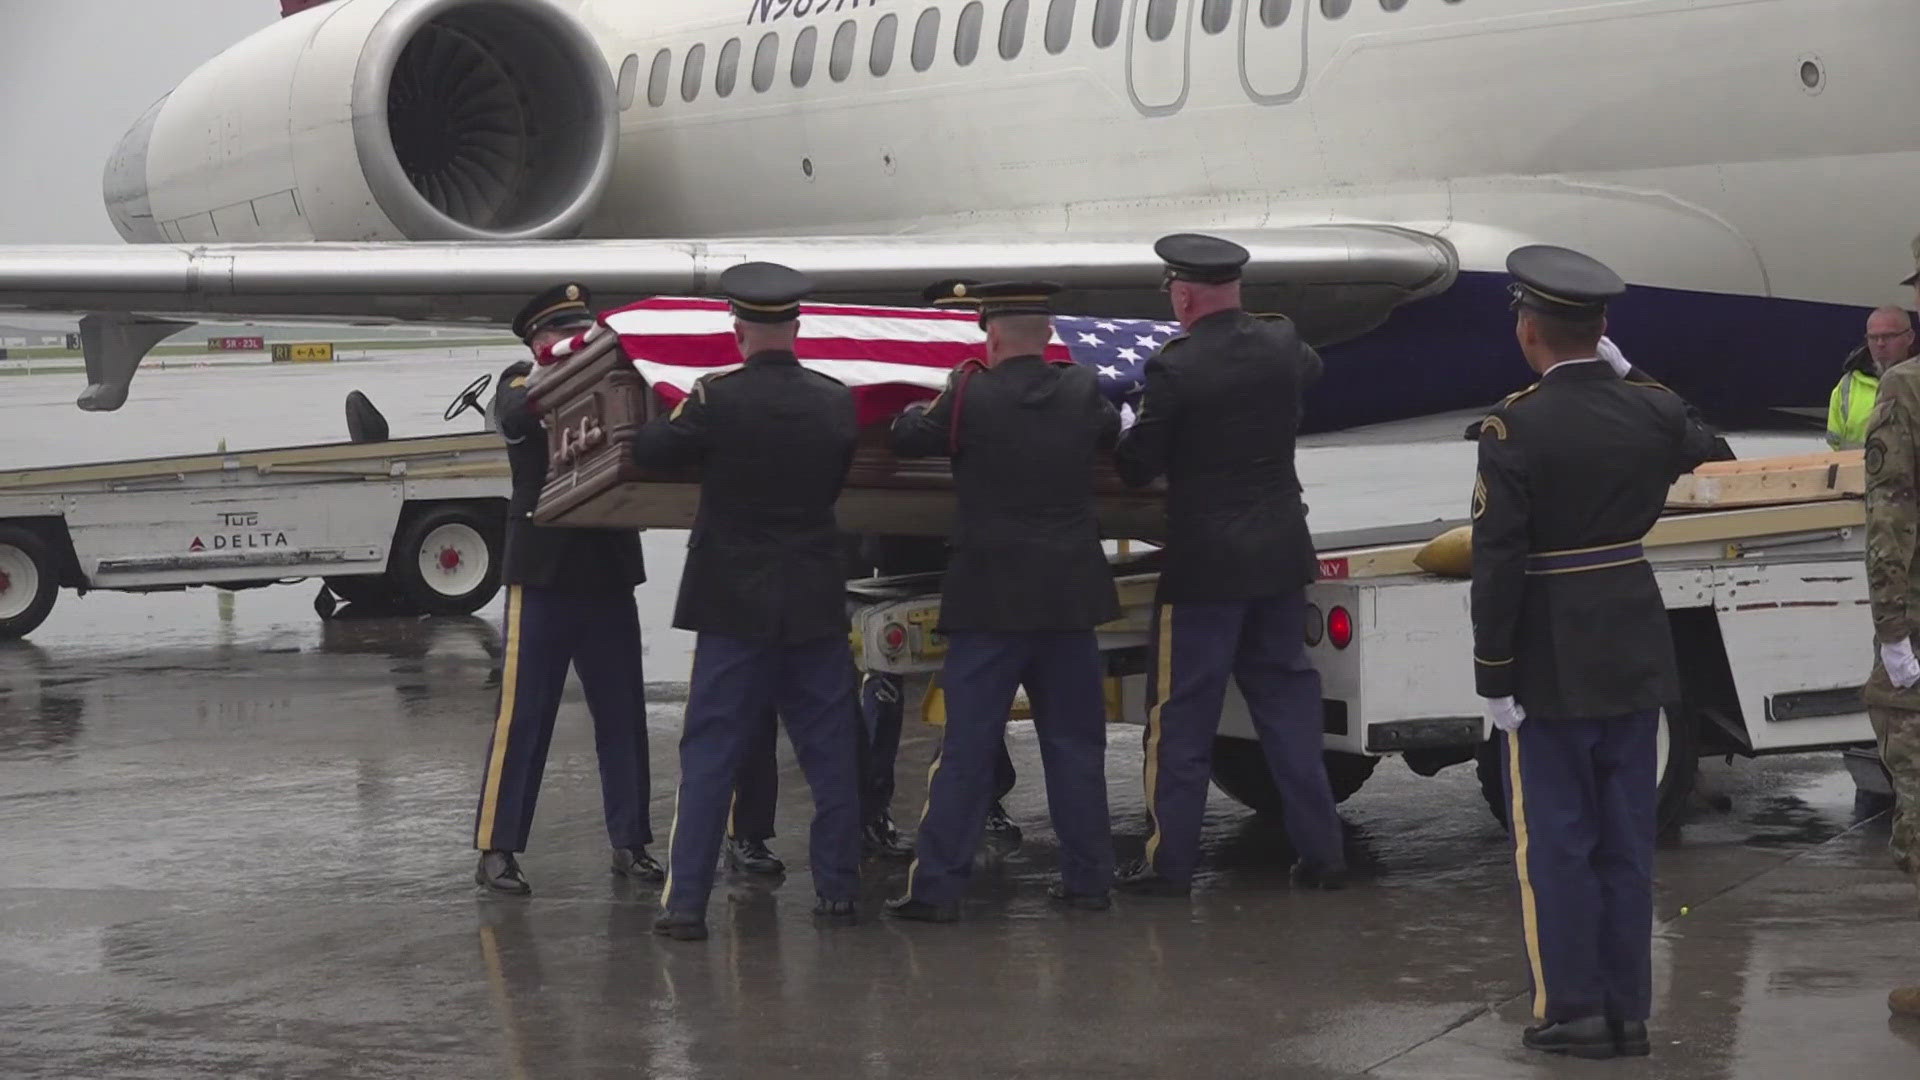 The remains of Army Private First Class Harold Wilder returned at McGhee Tyson Airport on Friday. He was 19 years old when he was killed in 1950.